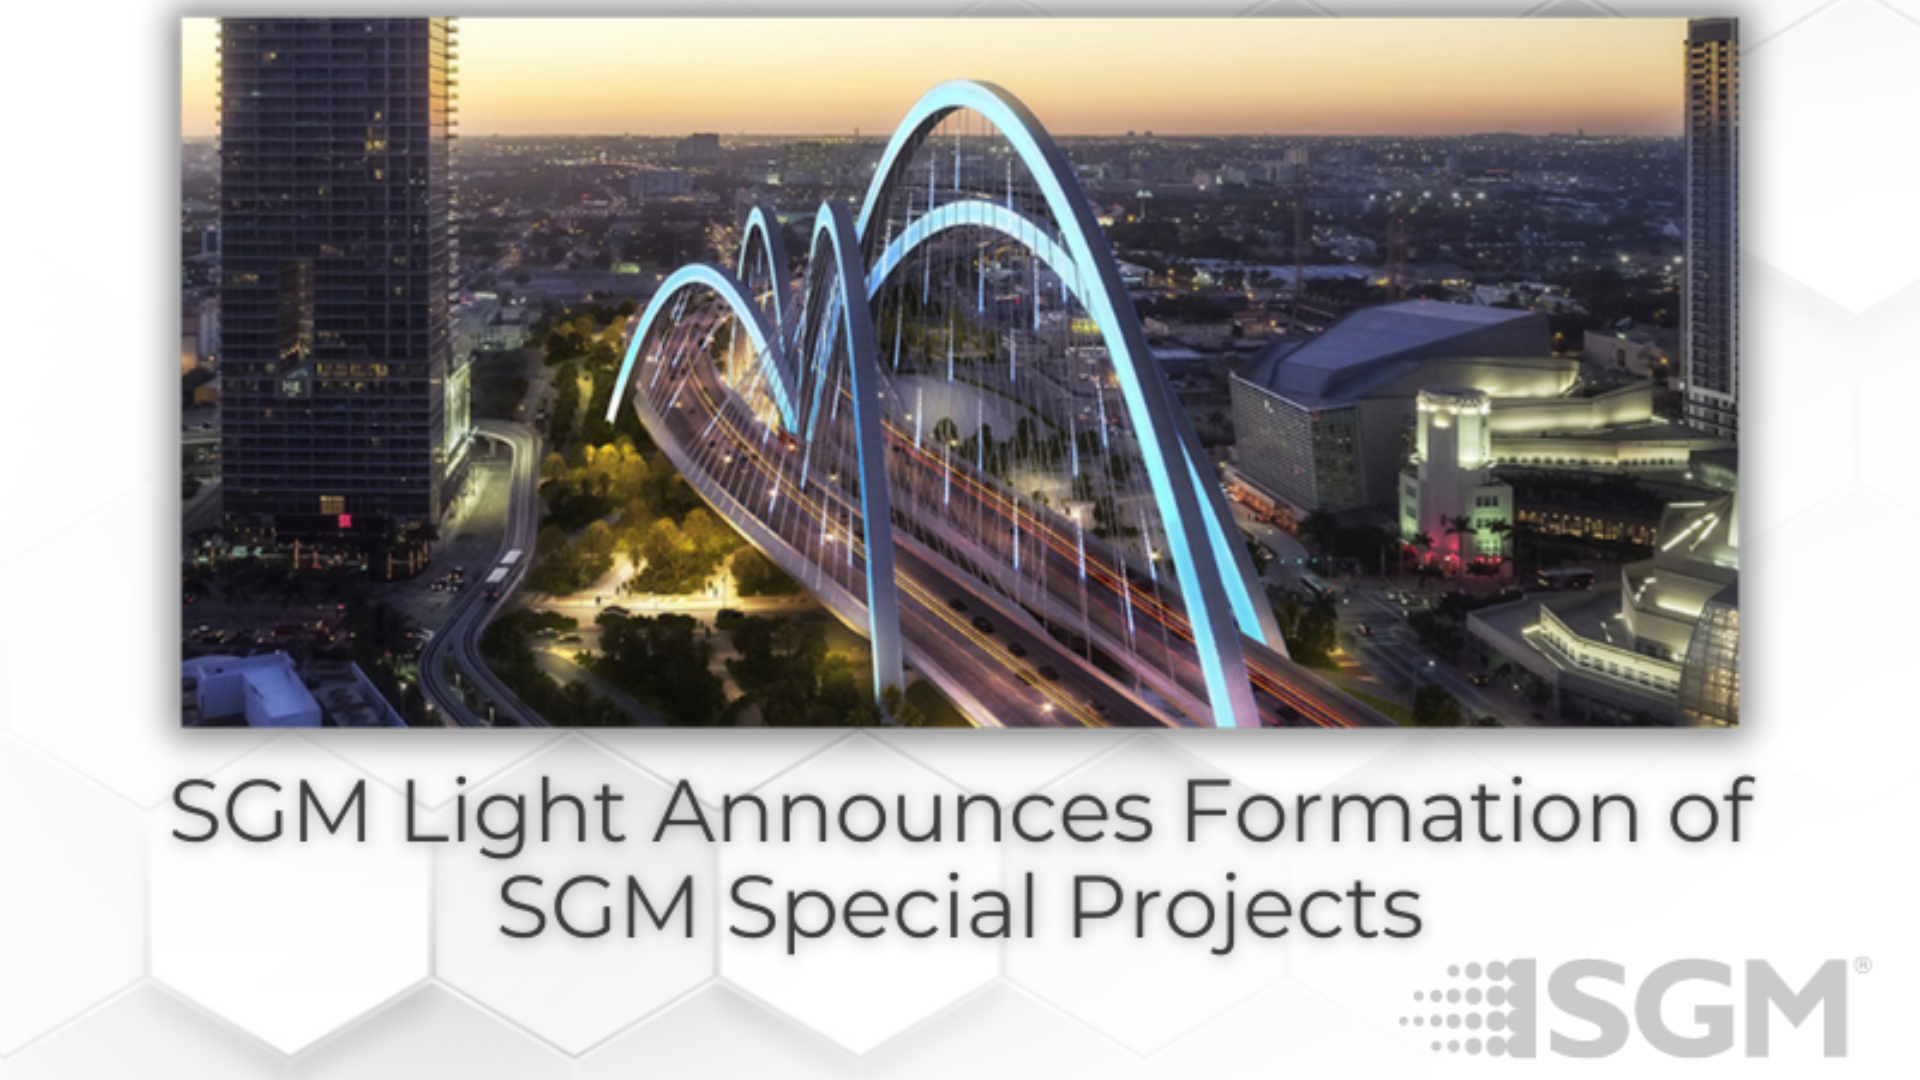 Picture of a bridge illuminated with SGM Light fixtures Text beneath photo reads SGM Light Announces Formation of SGM Speci